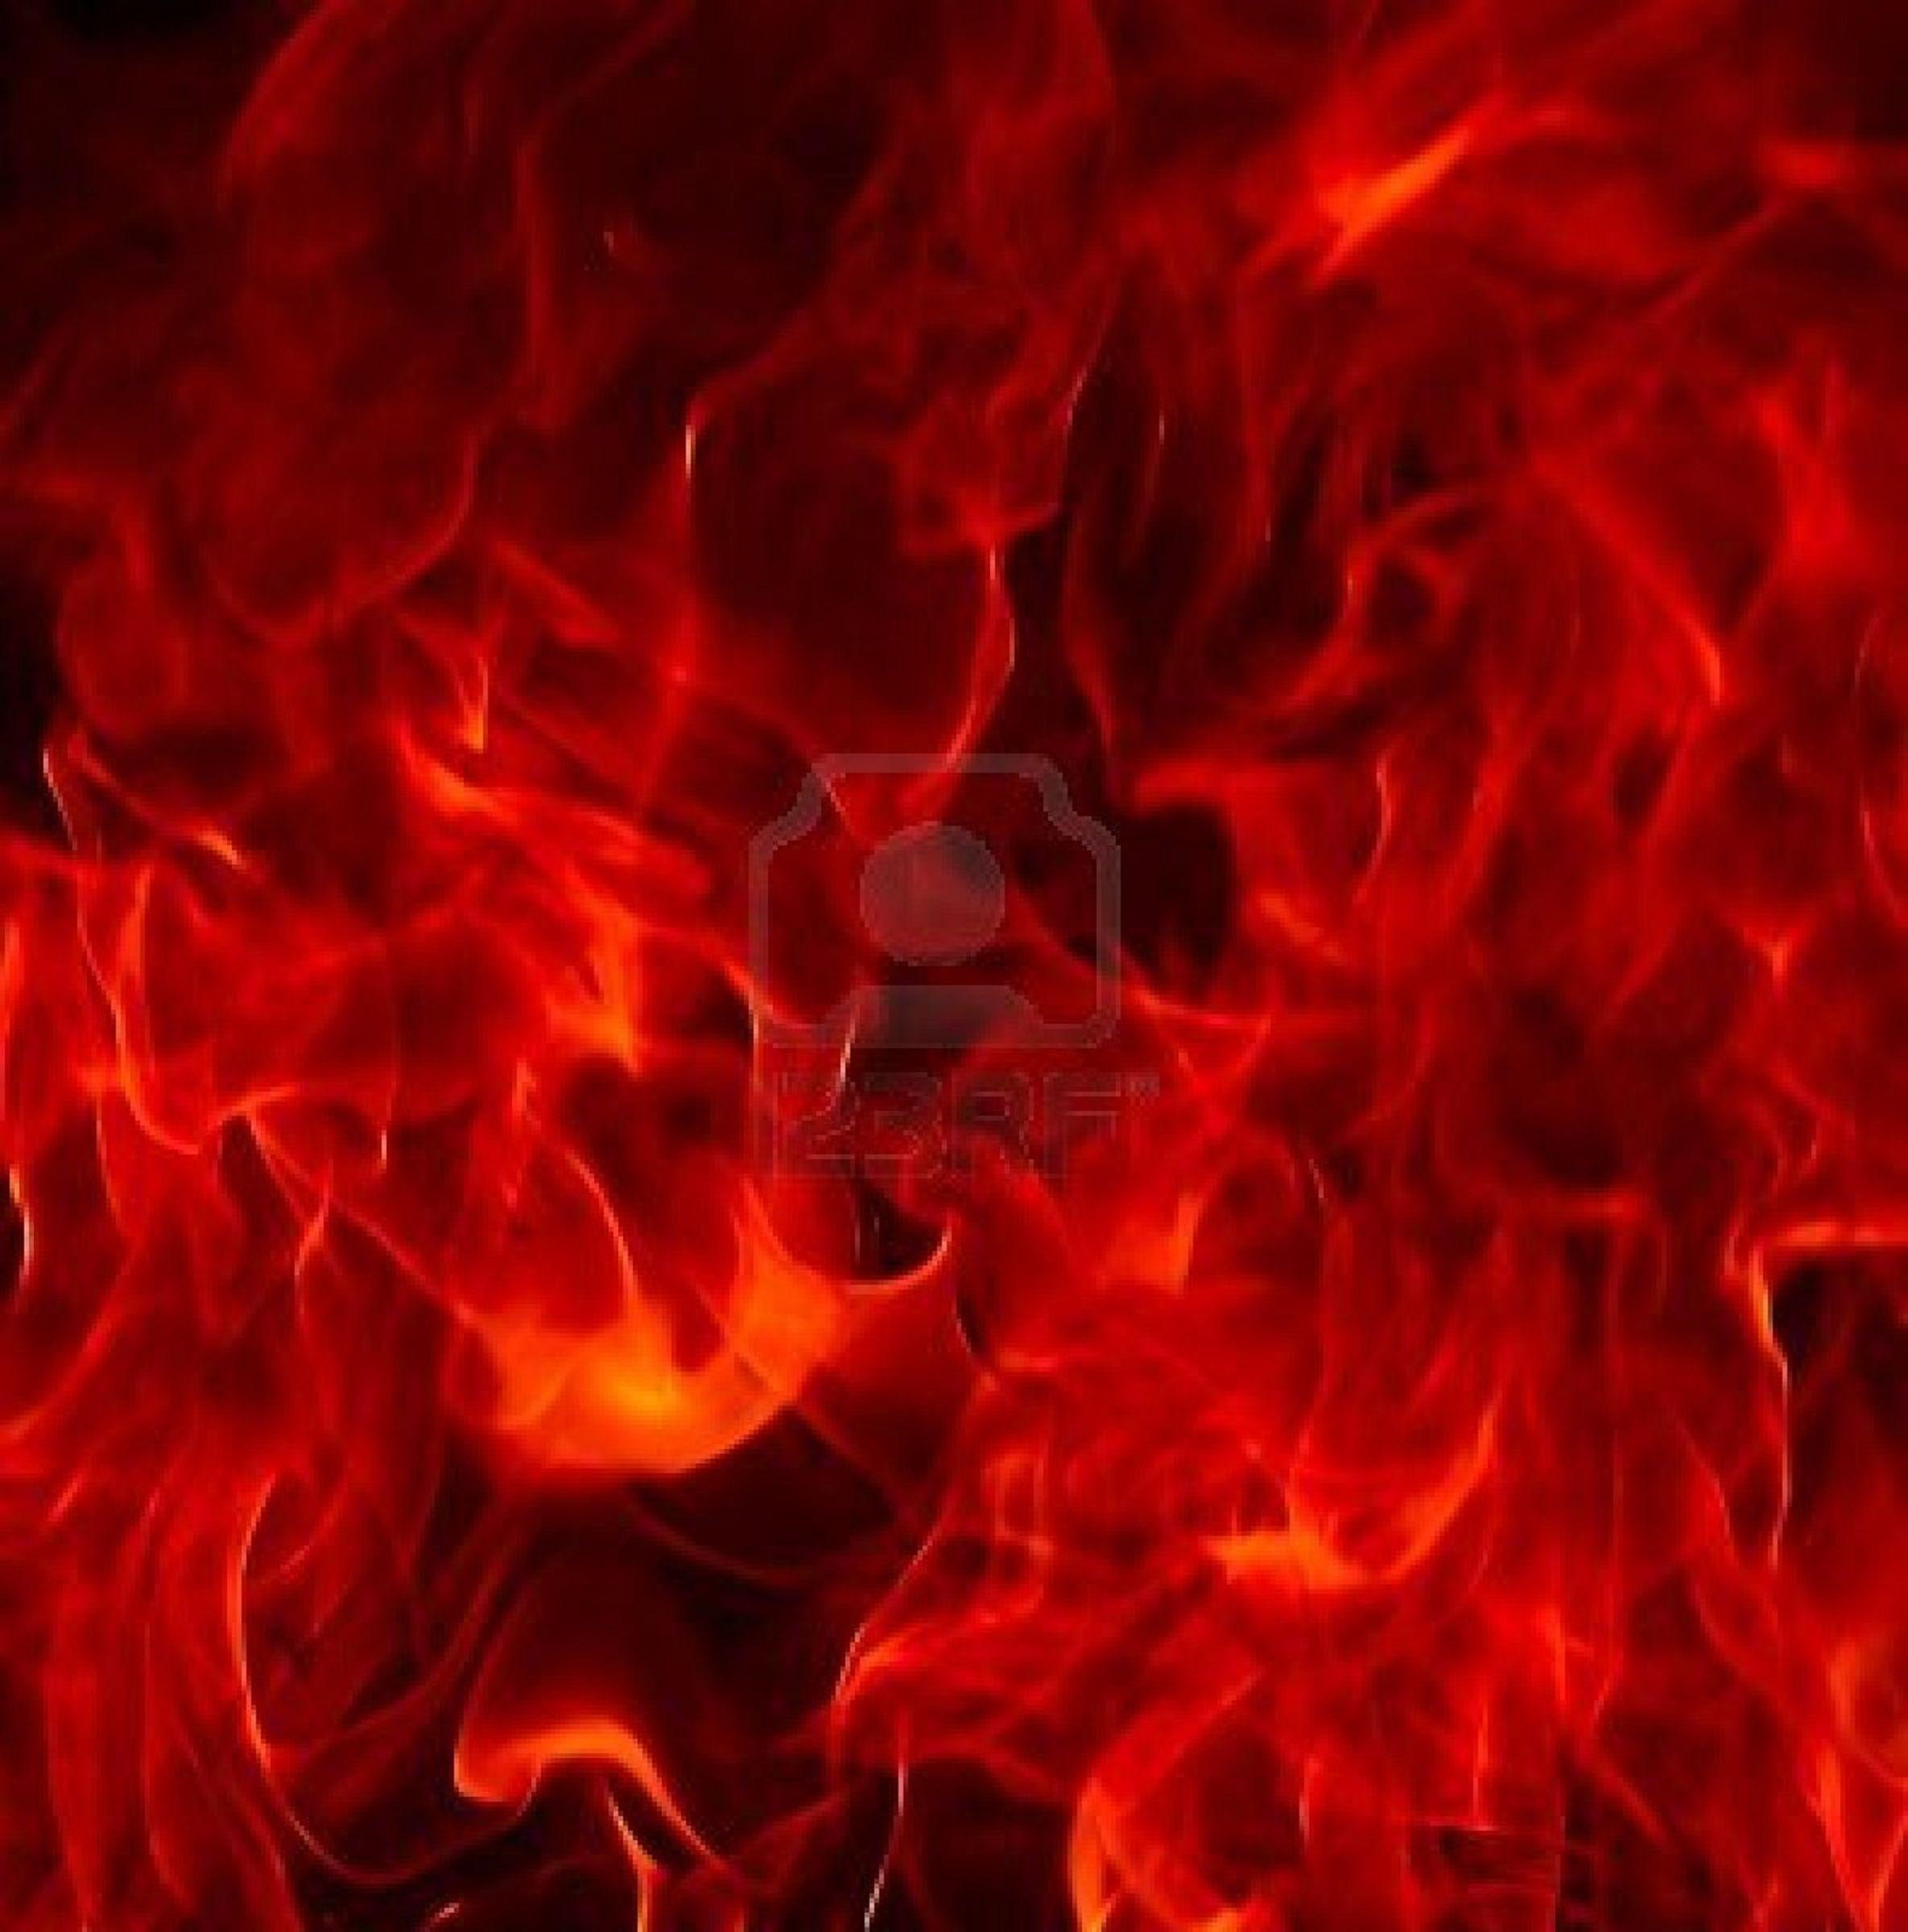 274100 Red Flame Stock Photos Pictures  RoyaltyFree Images  iStock  Red  flame background